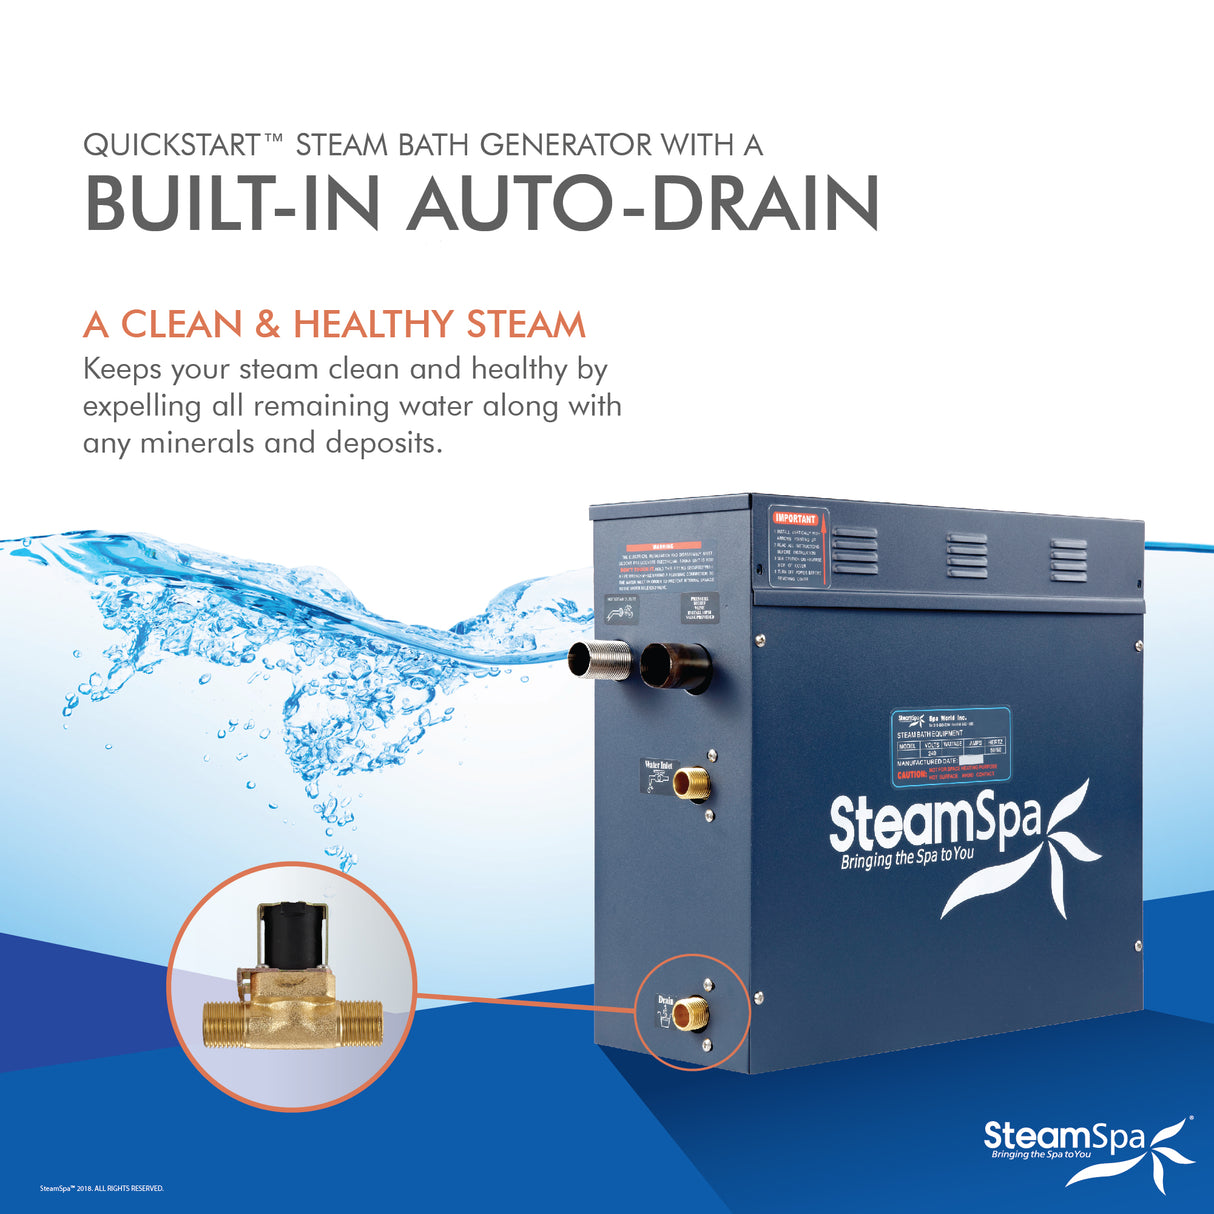 SteamSpa Executive 6 KW QuickStart Acu-Steam Bath Generator Package with Built-in Auto Drain and Install Kit in Brushed Nickel | Steam Generator Kit with Dual Control Panel Steamhead 240V | EXT600BN-A EXT600BN-A